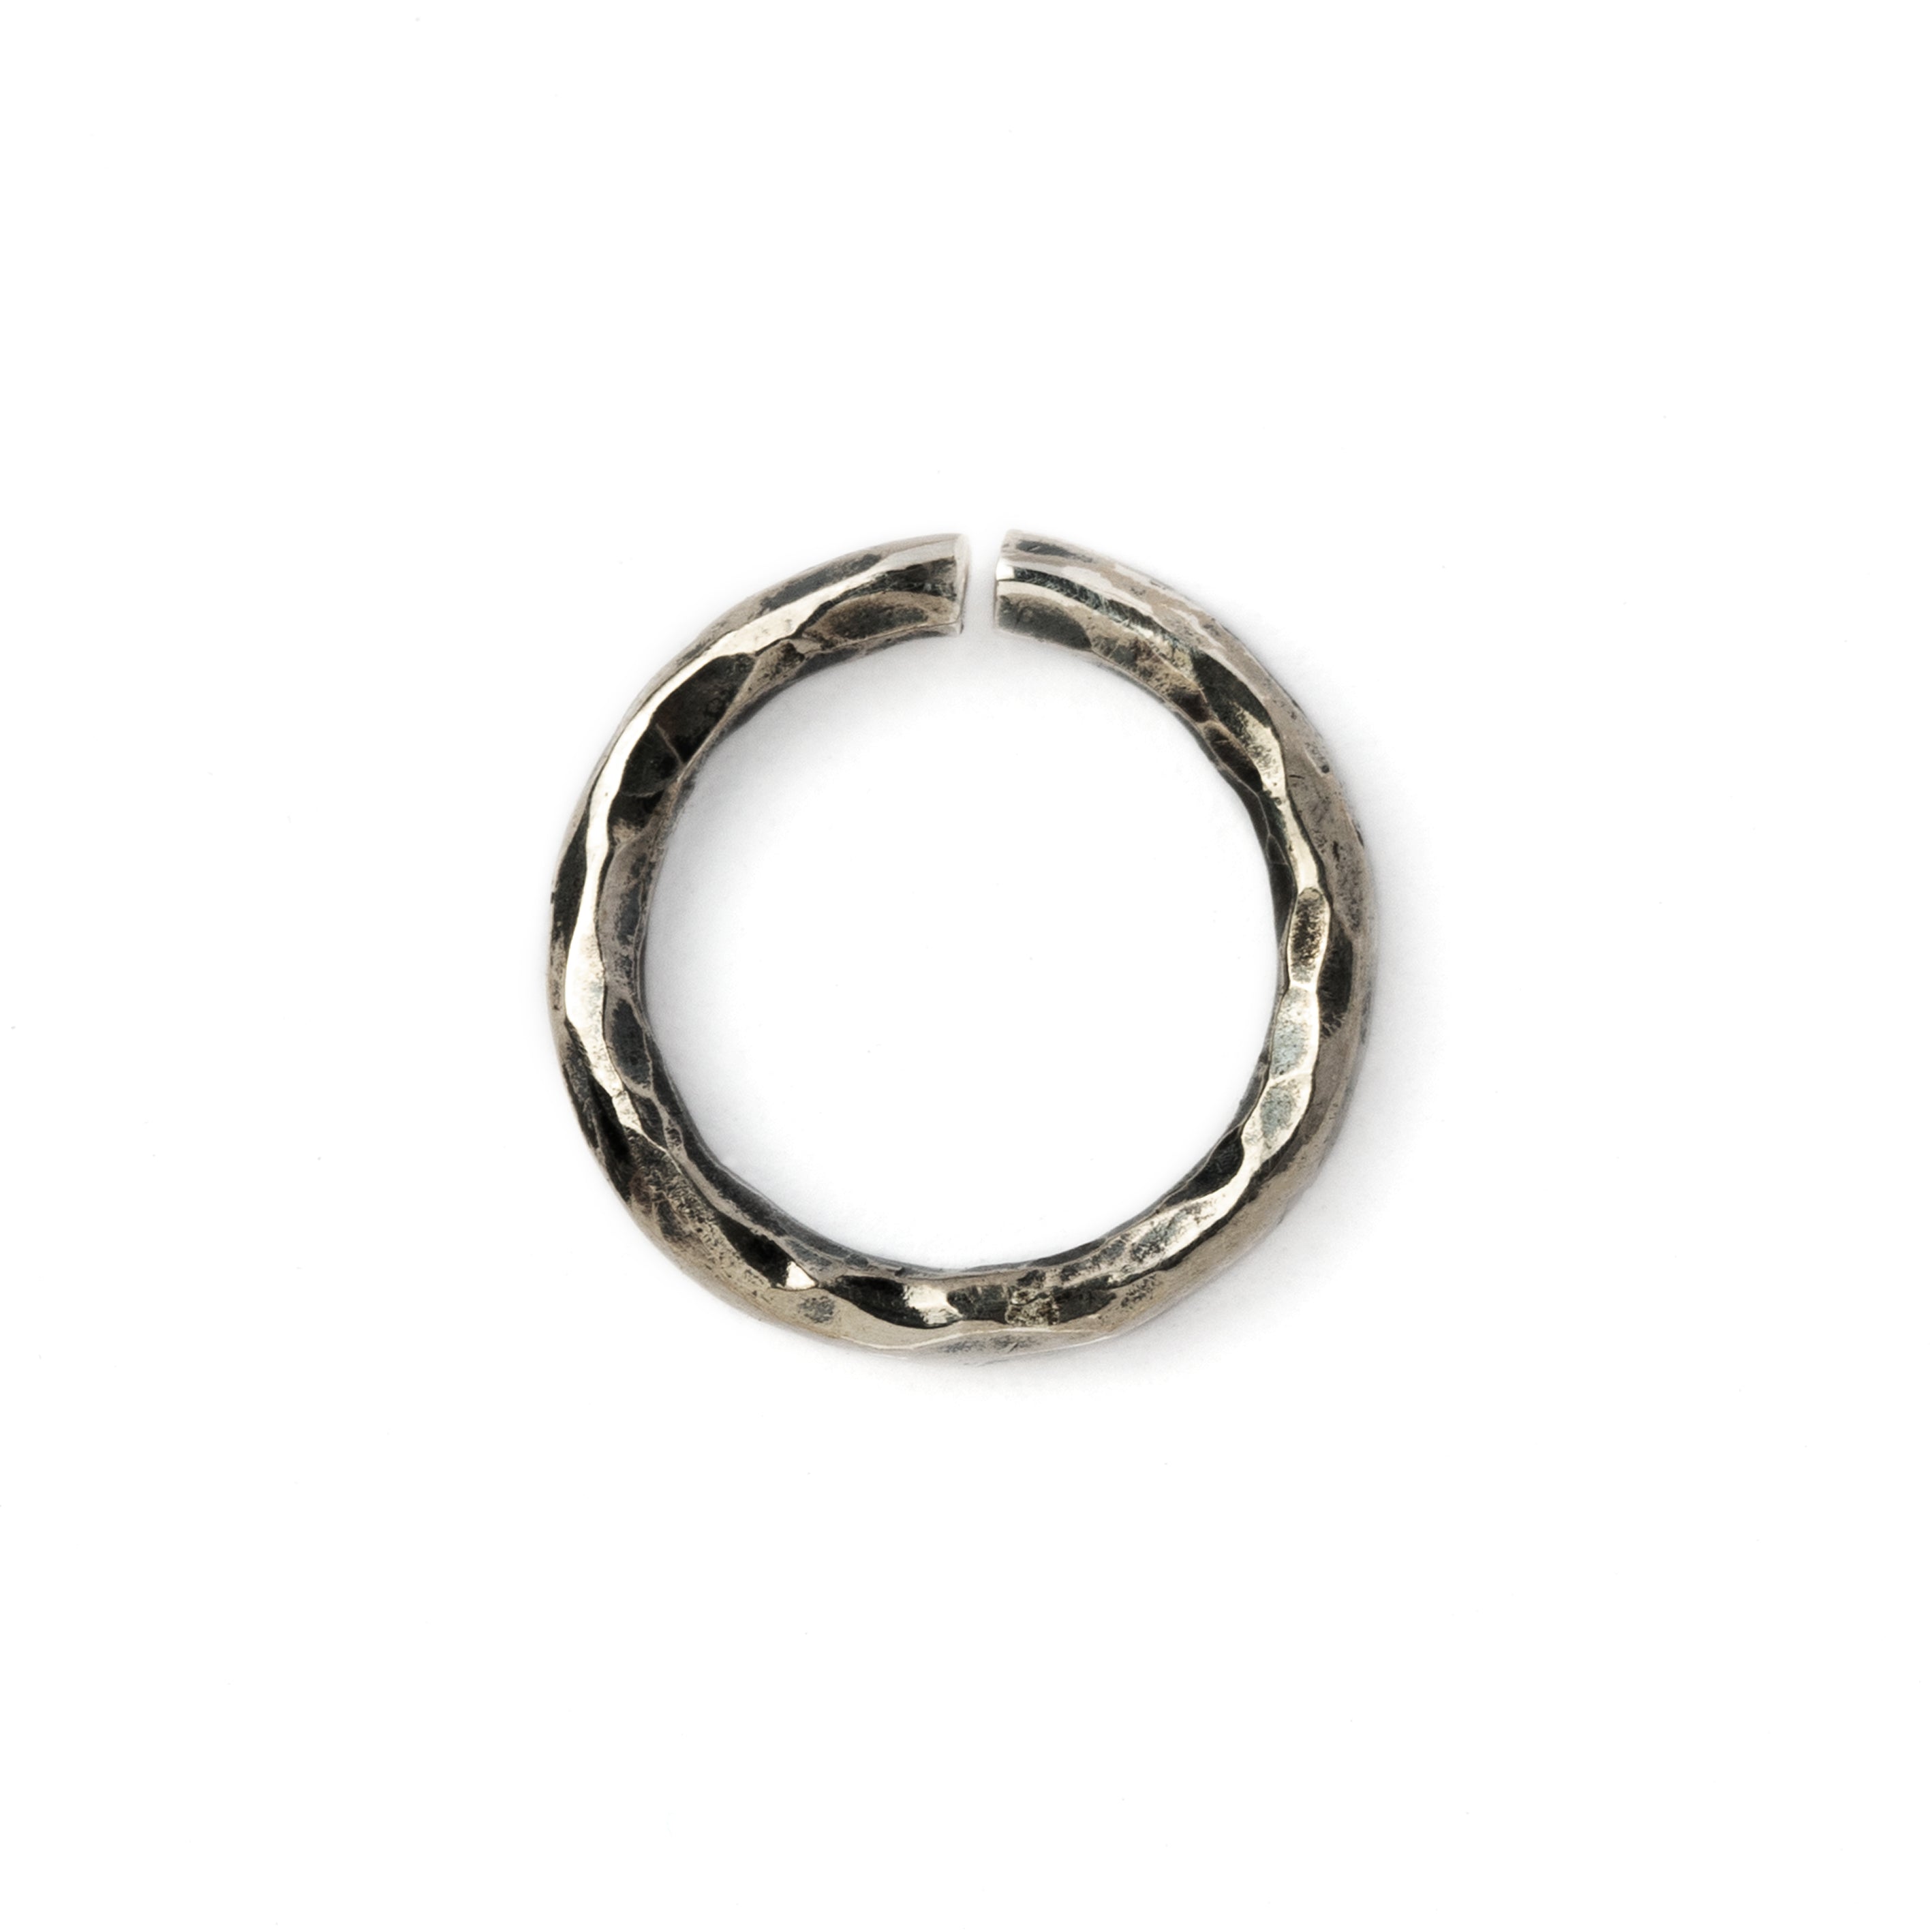 Hammered silver seamless piercing ring frontal view